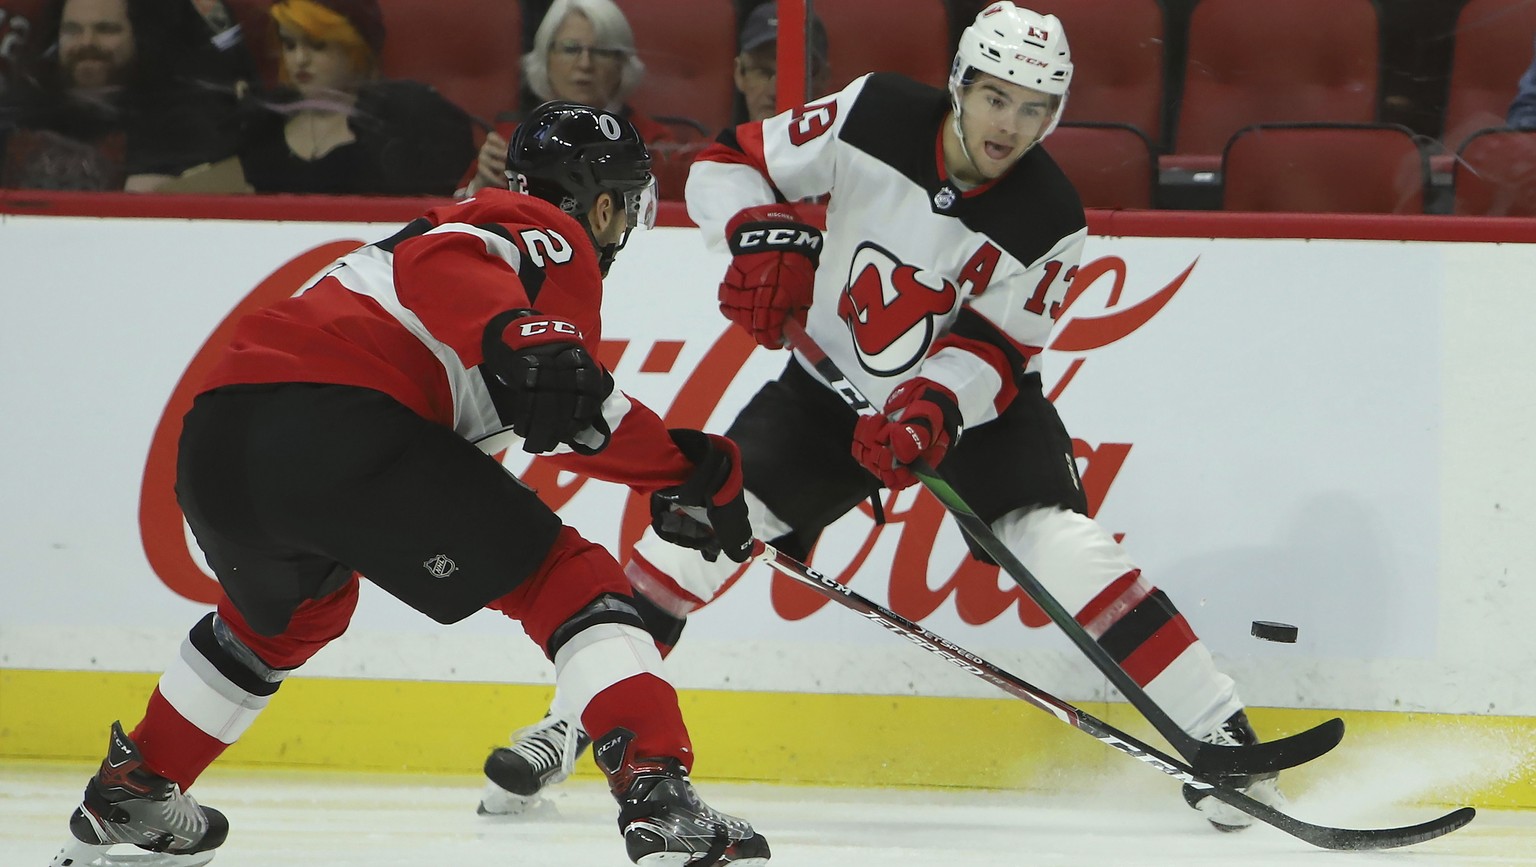 New Jersey Devils center Nico Hischier (13) shoots the puck past Ottawa Senators defenseman Dylan DeMelo (2) during first period NHL hockey action in Ottawa on Monday, Jan. 27, 2020. (Fred Chartrand/T ...